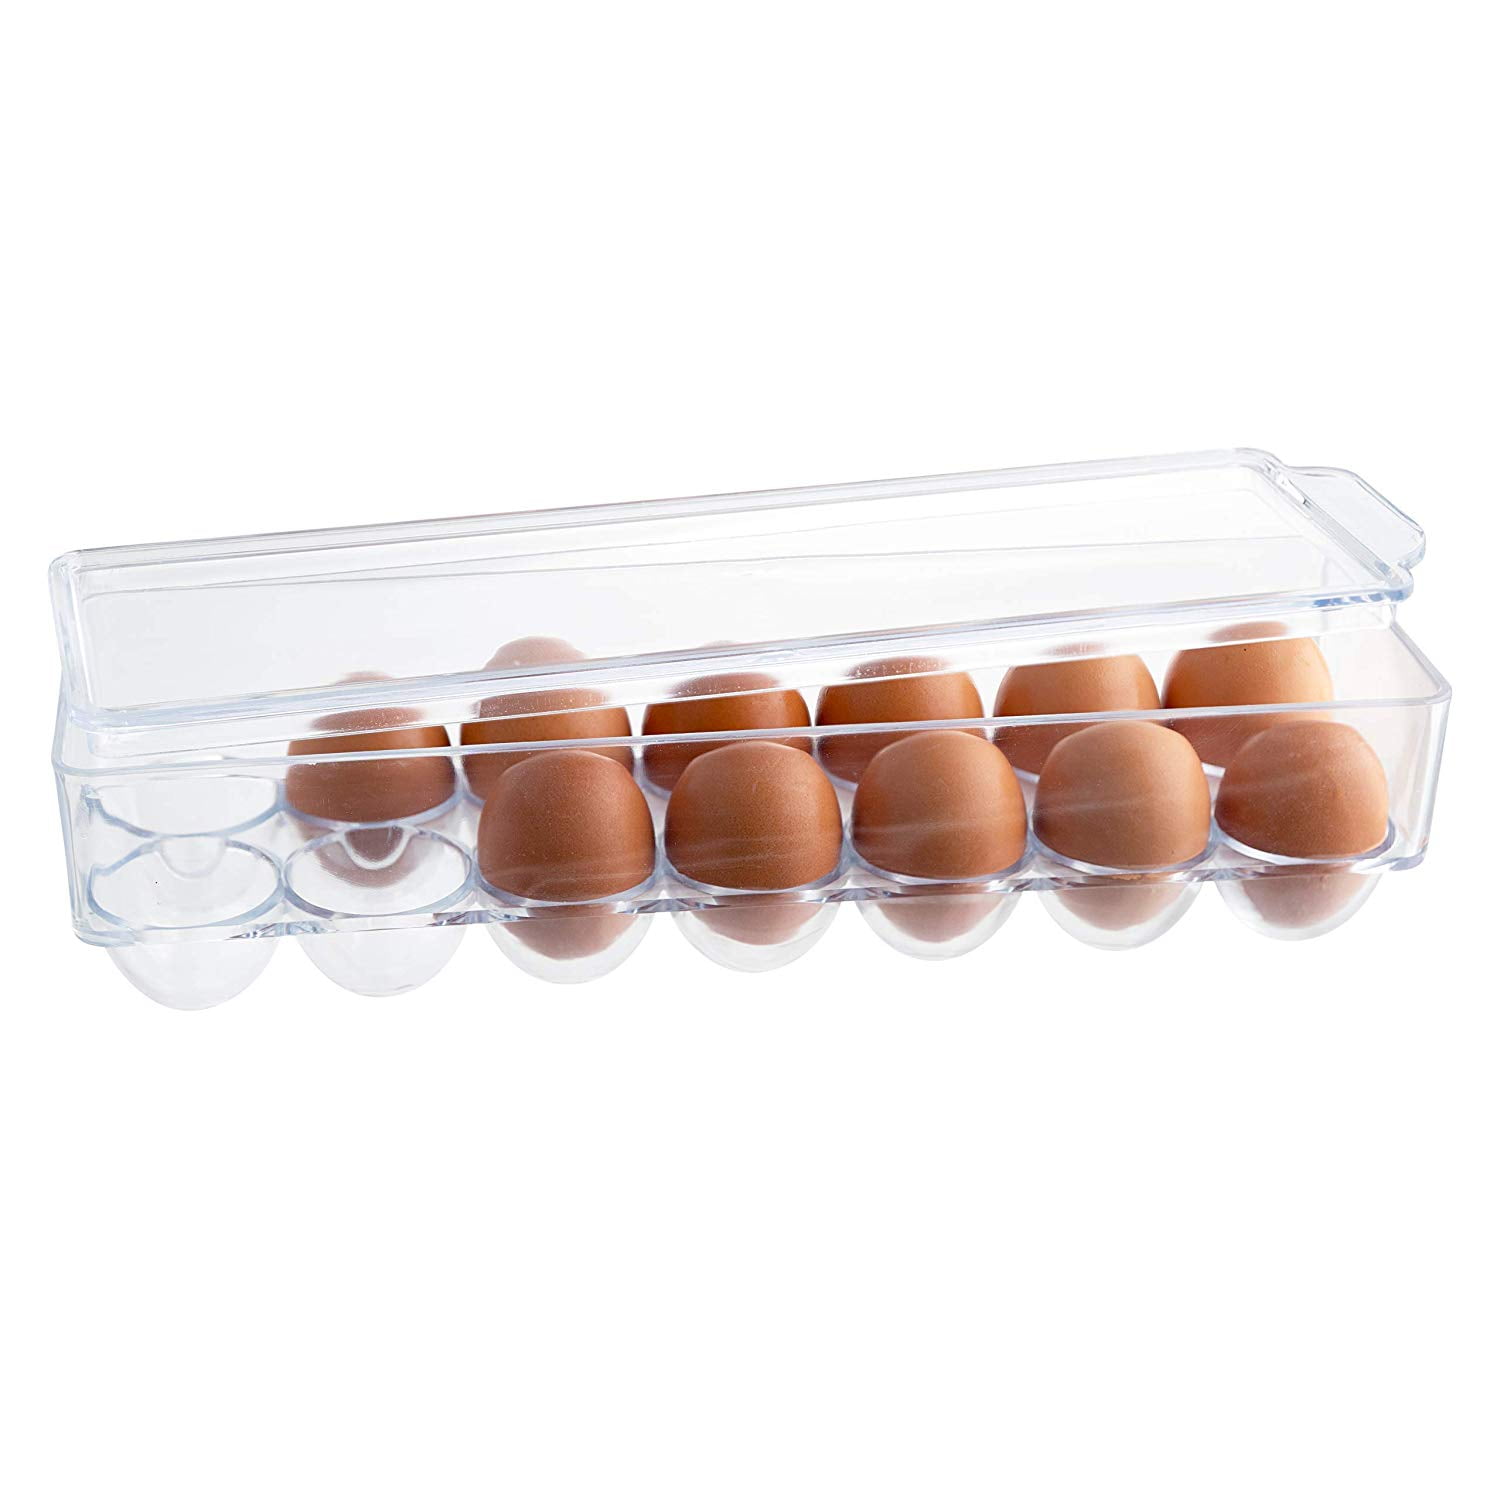 Egg Container for Refrigerator 24 Count Egg Tray Plastic Egg Holder Egg Storage Container with Lid and Handle Clear Stackable Egg Organizer Carrier for Fridge Kitchen and Protect & Keep Fresh 